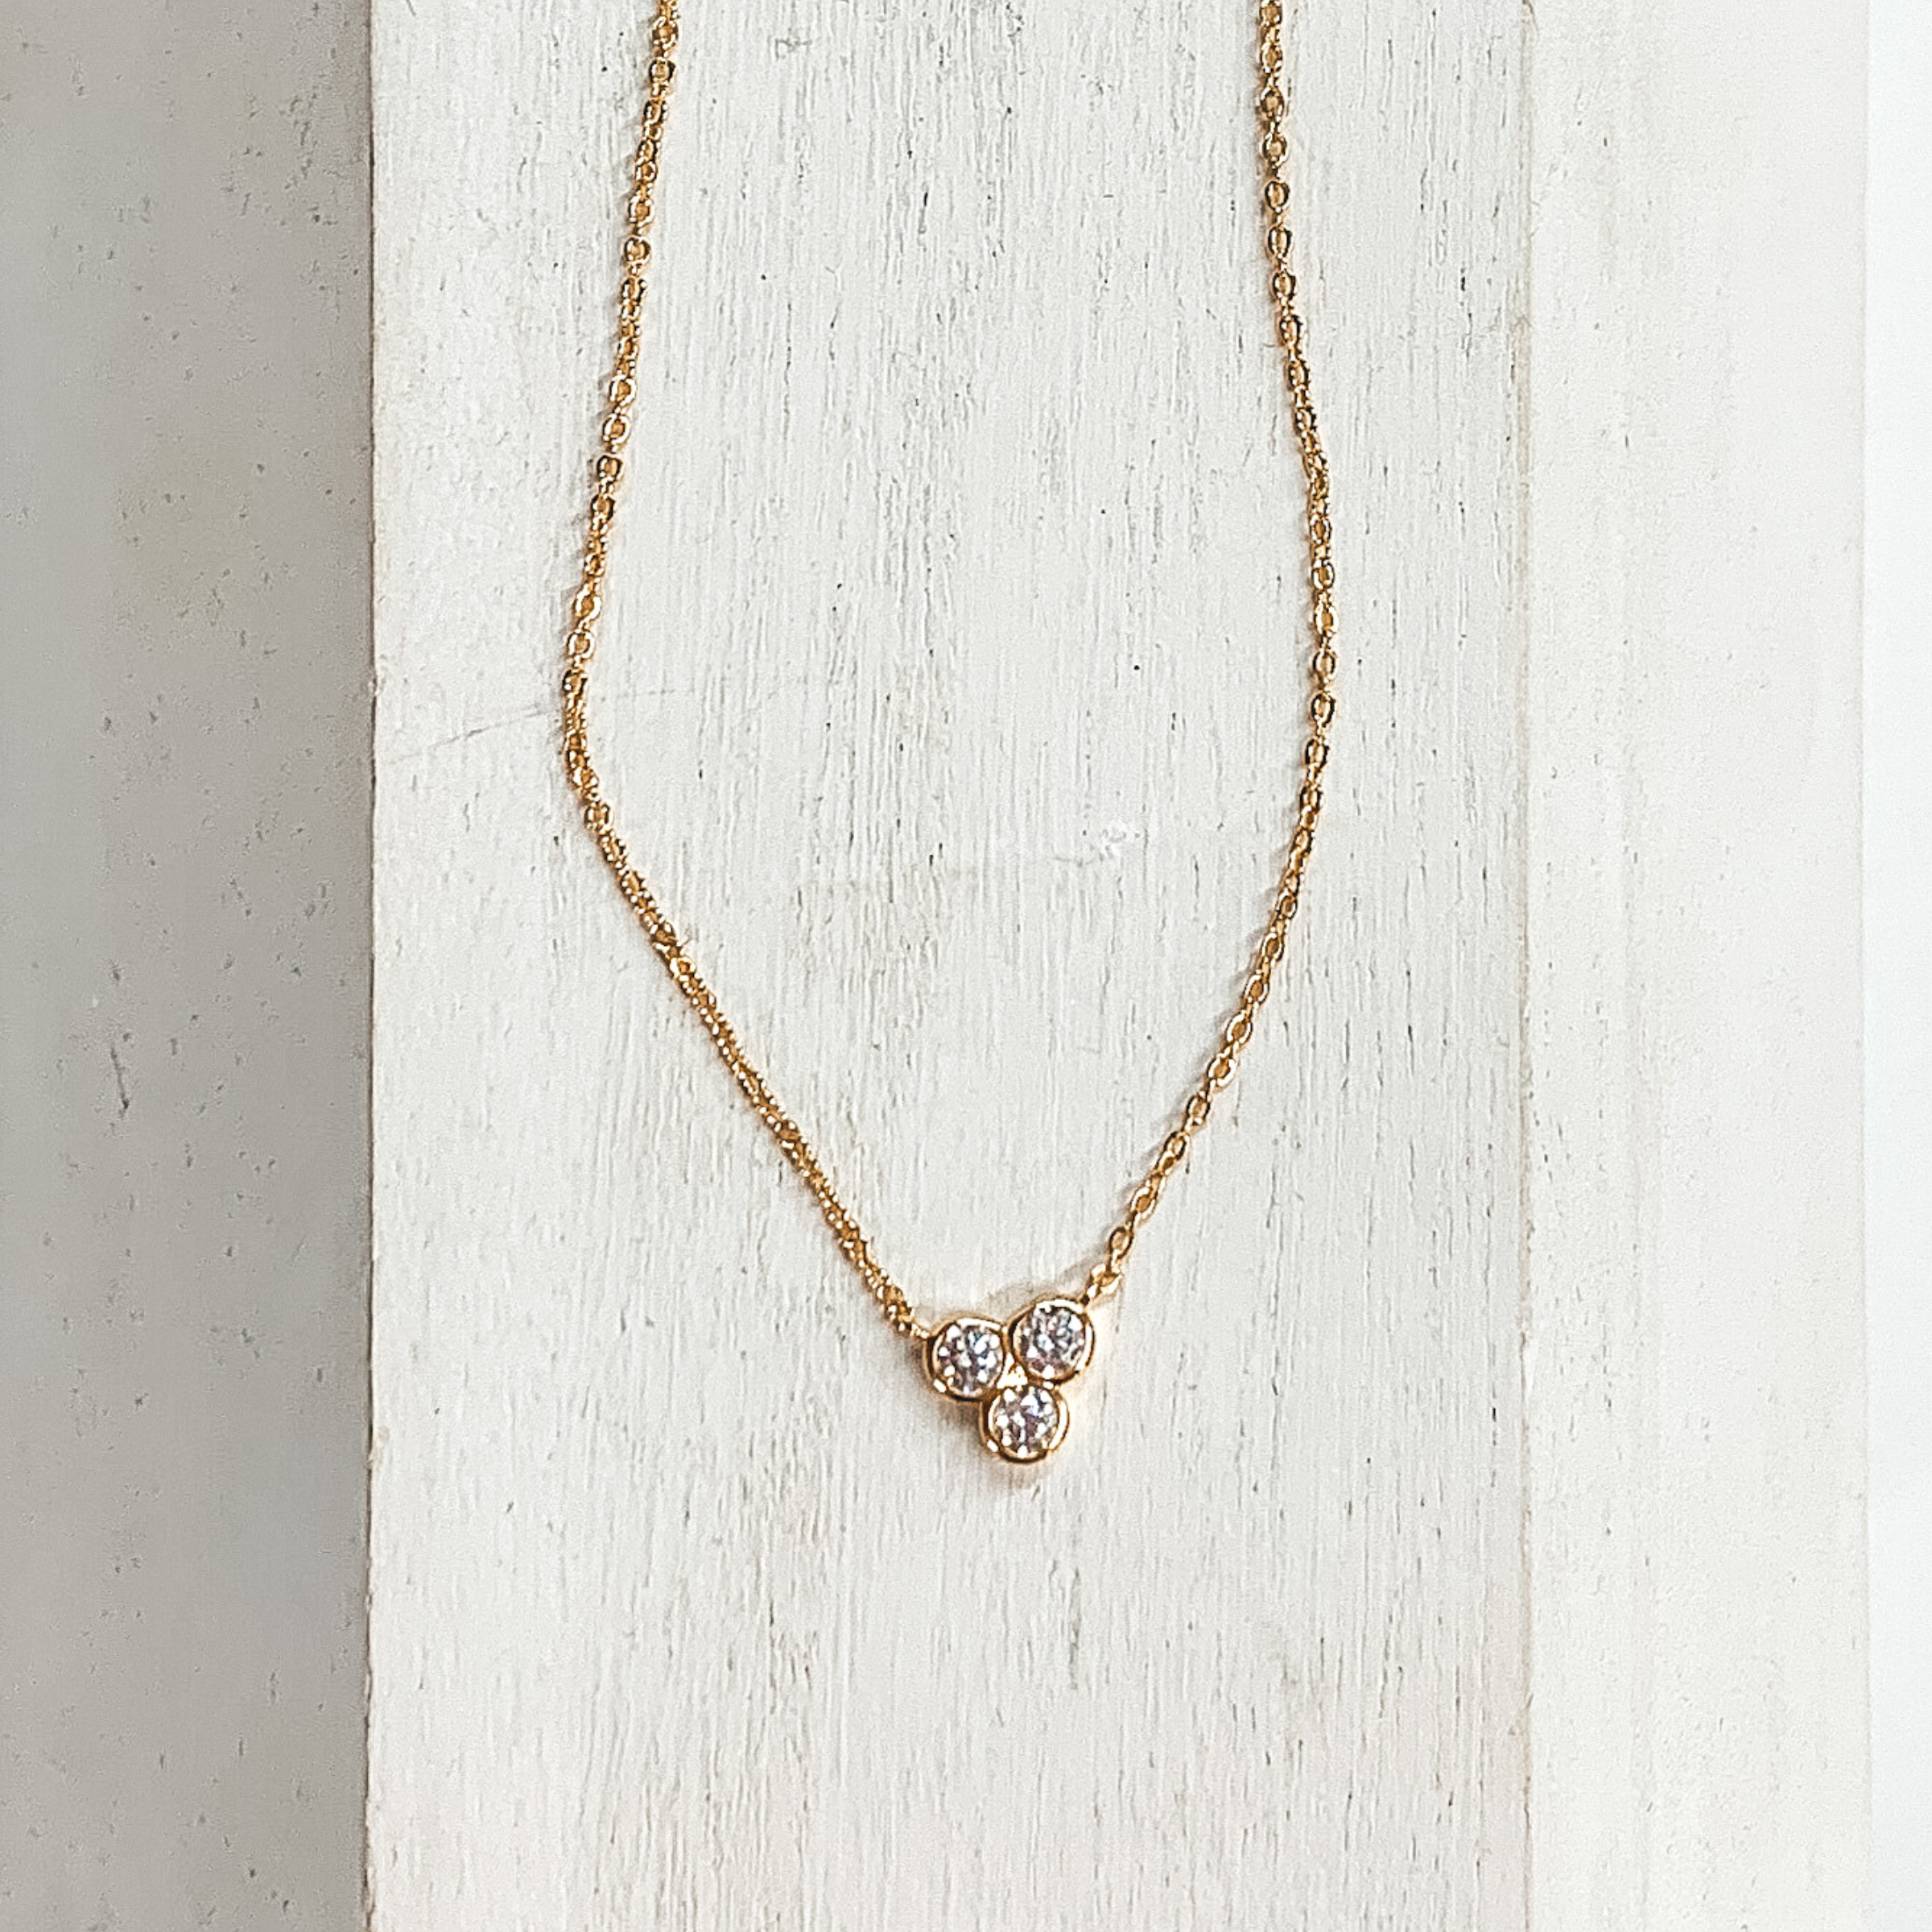 Good Daze Necklace with 3mm CZ Crystals in a Bezel Cluster in Gold - Giddy Up Glamour Boutique